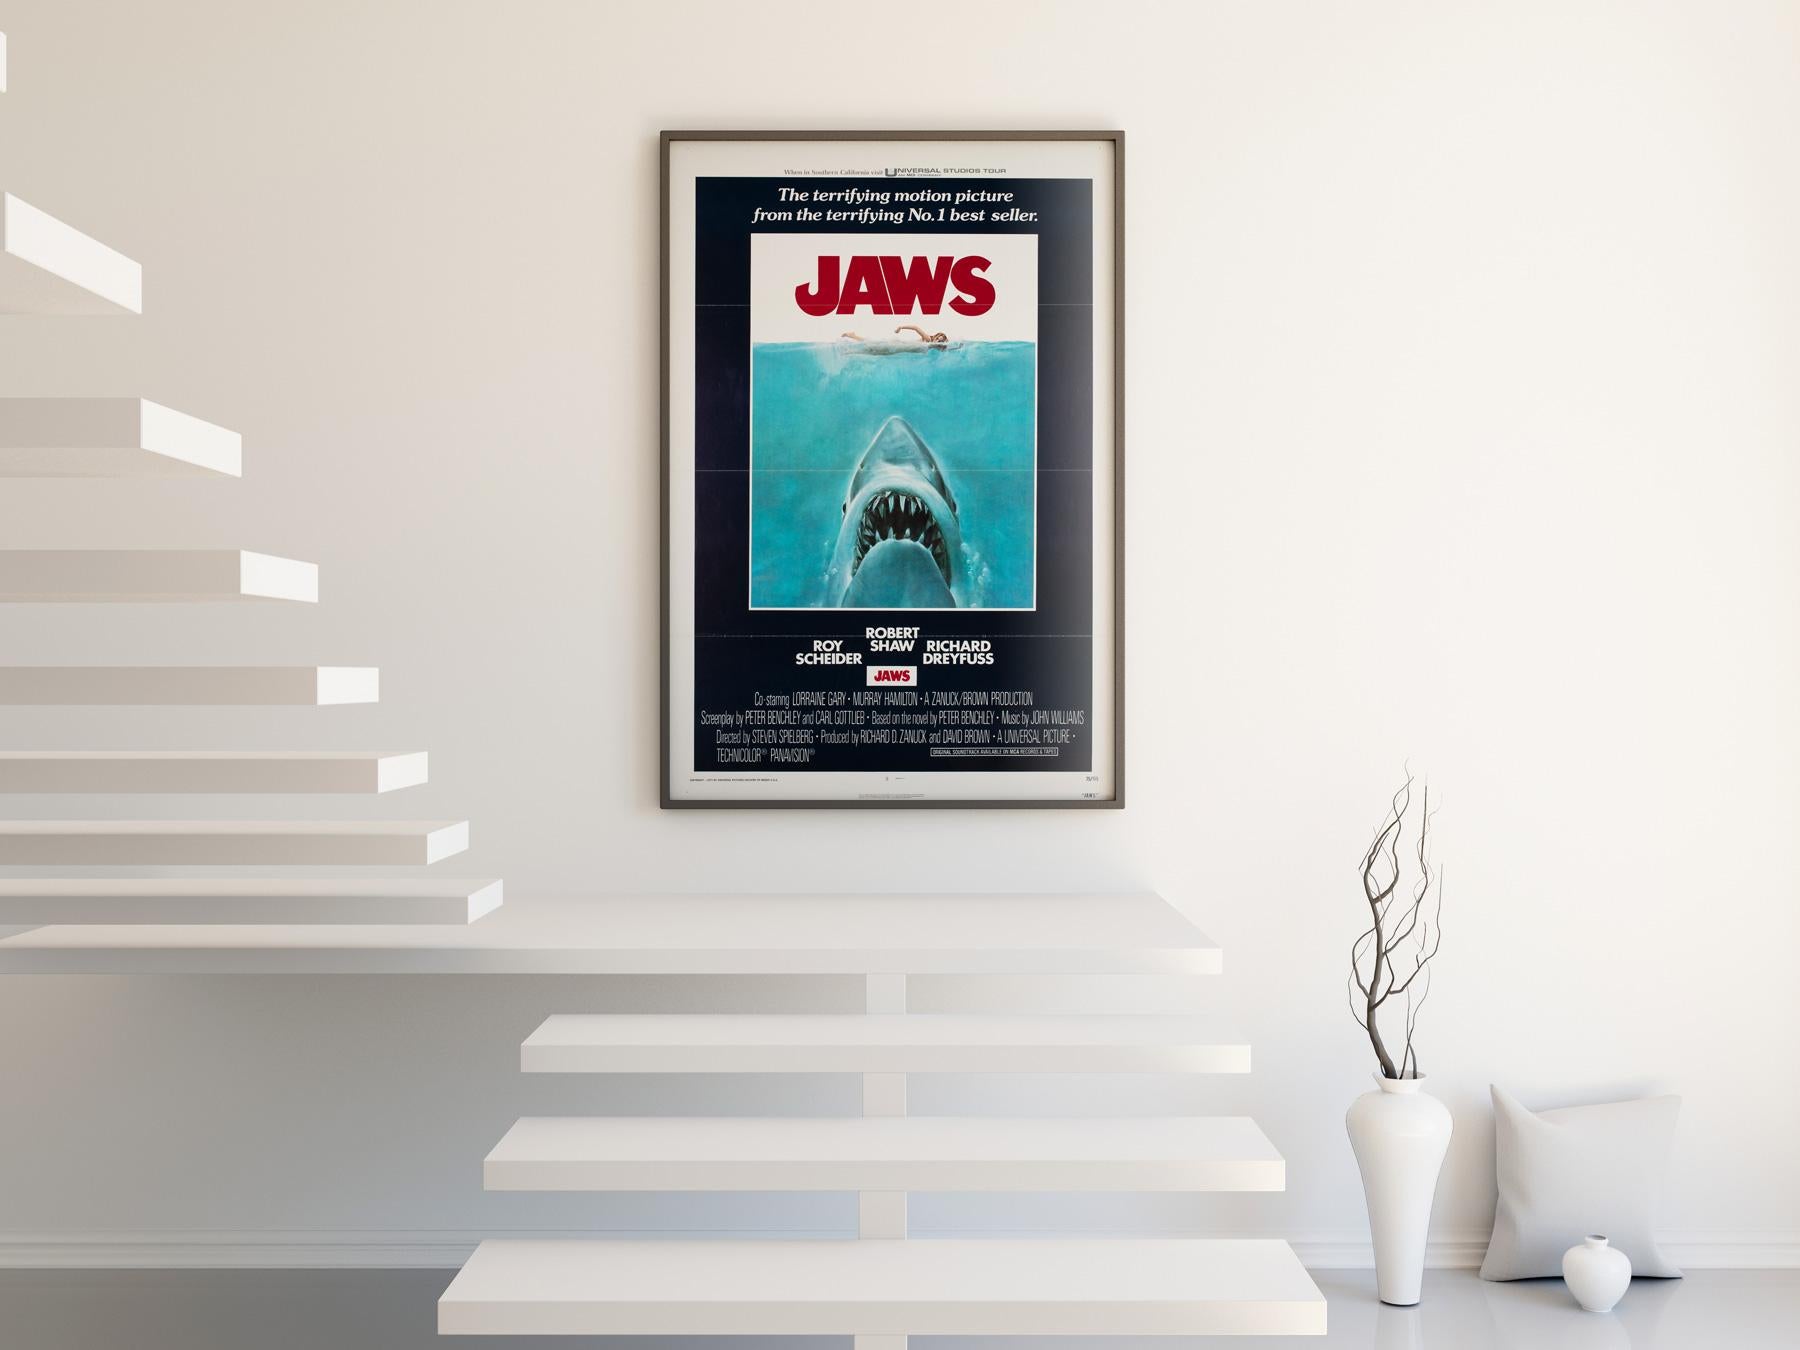 The poster with plenty of bite.

The original country-of-origin US 1 sheet film poster for Steven Spielberg’s seminal 70s Shark chiller Jaws, featuring the classic Roger Kastel artwork. Fantastic unrestored tri-folded condition. It is very hard to